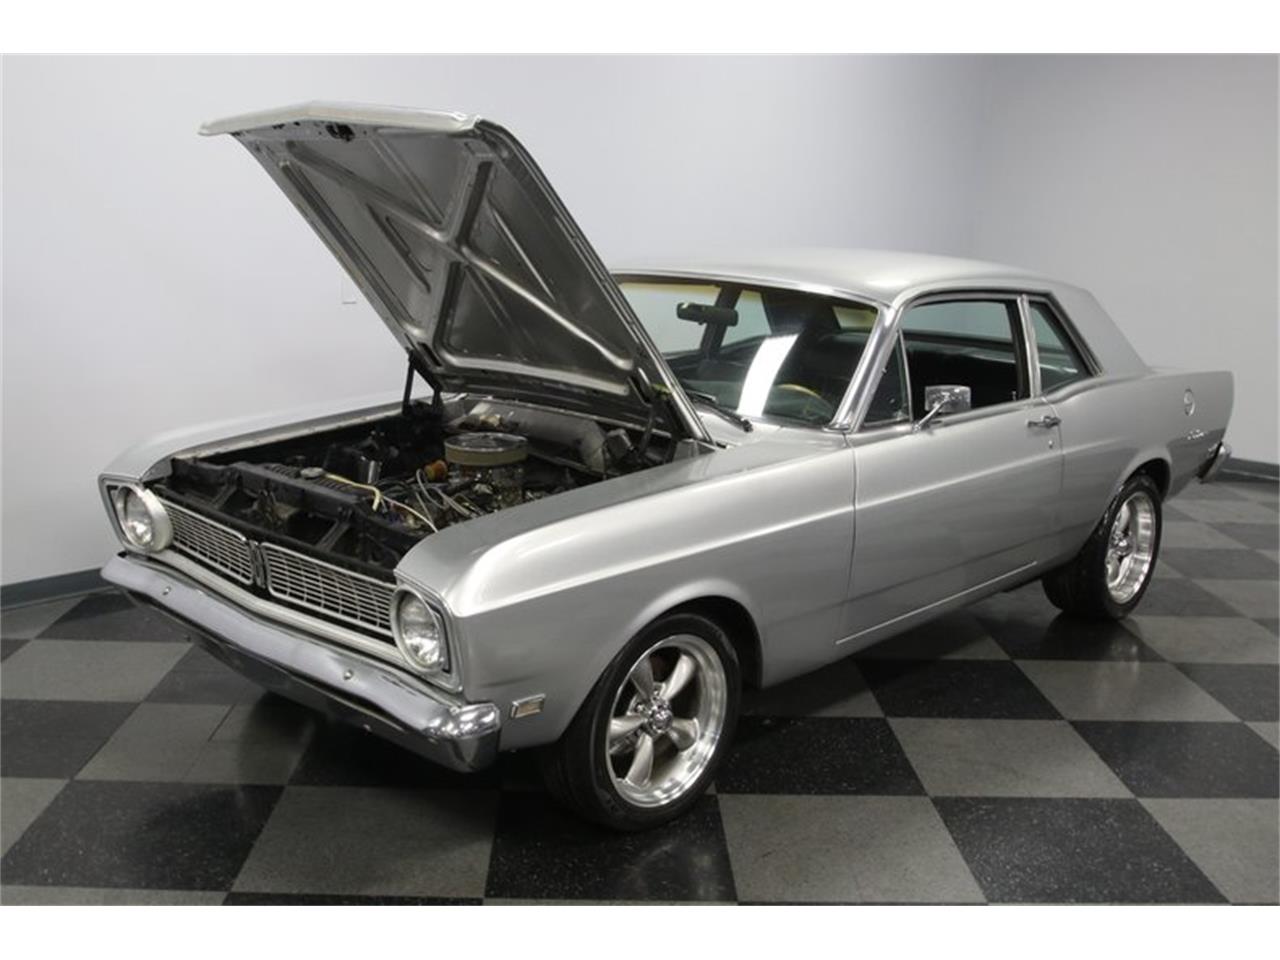 1969 ford falcon for sale classiccars com cc 1180192 1969 ford falcon for sale classiccars